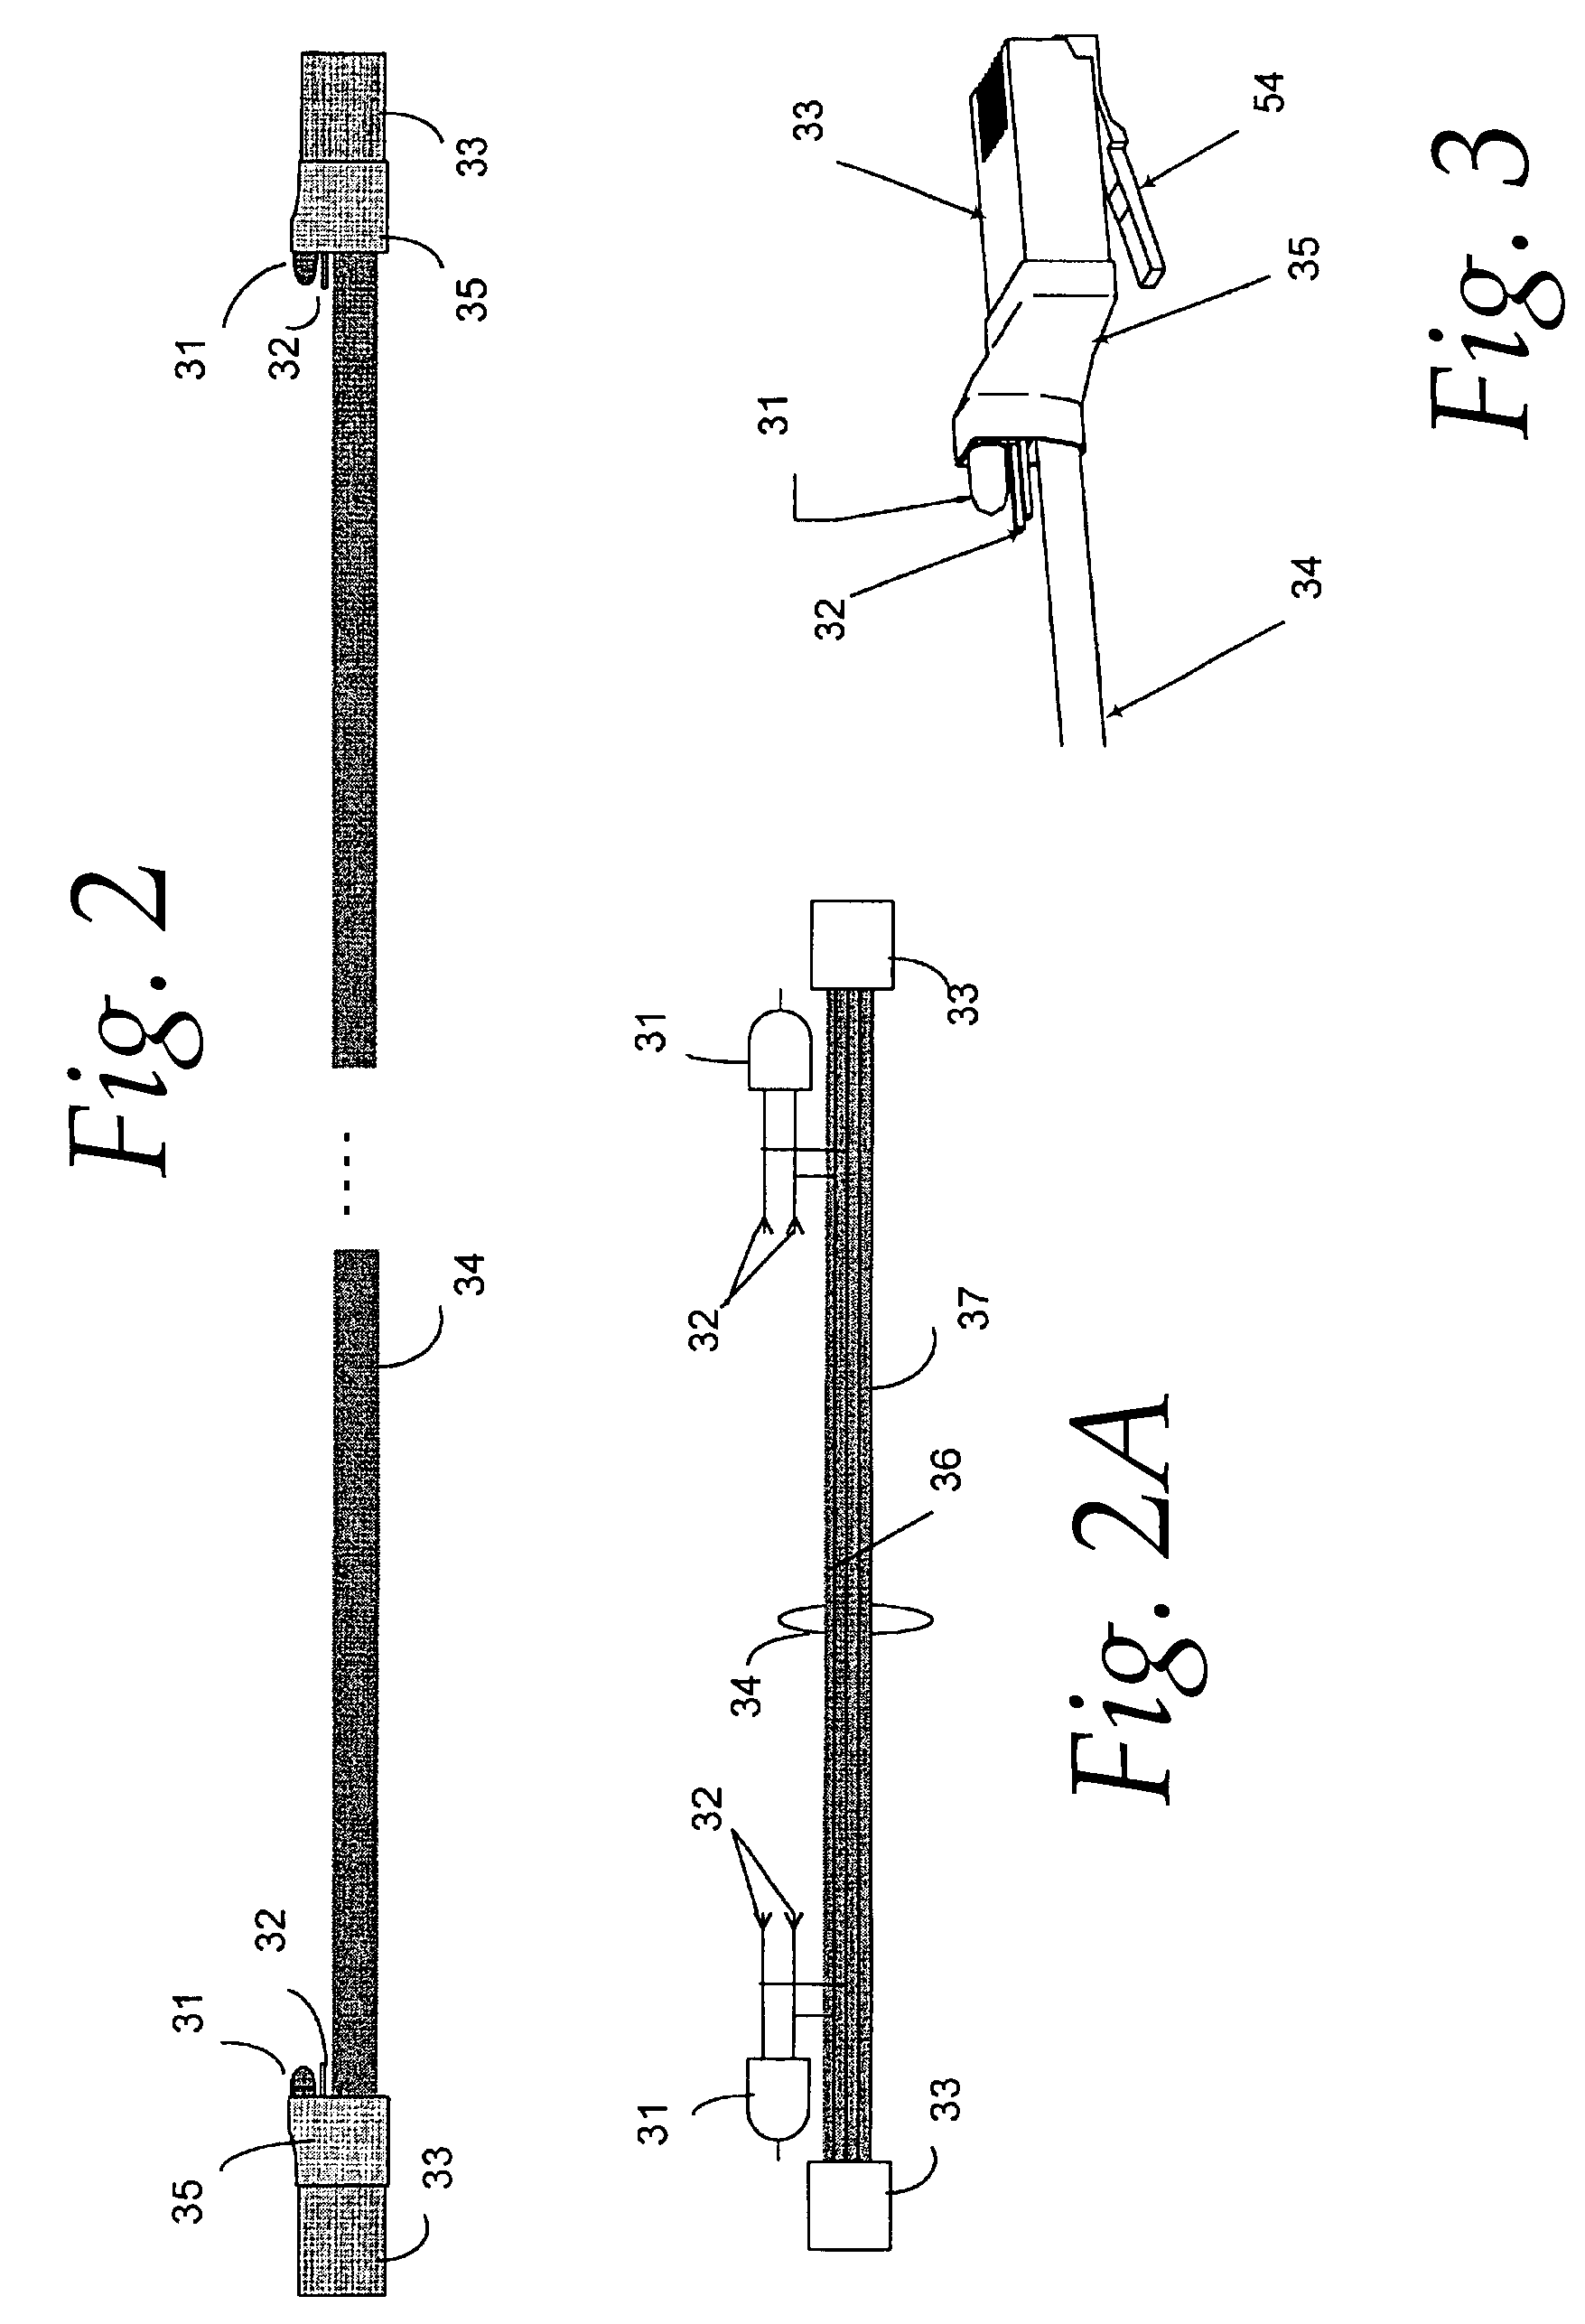 Method and apparatus for tracing remote ends of networking cables